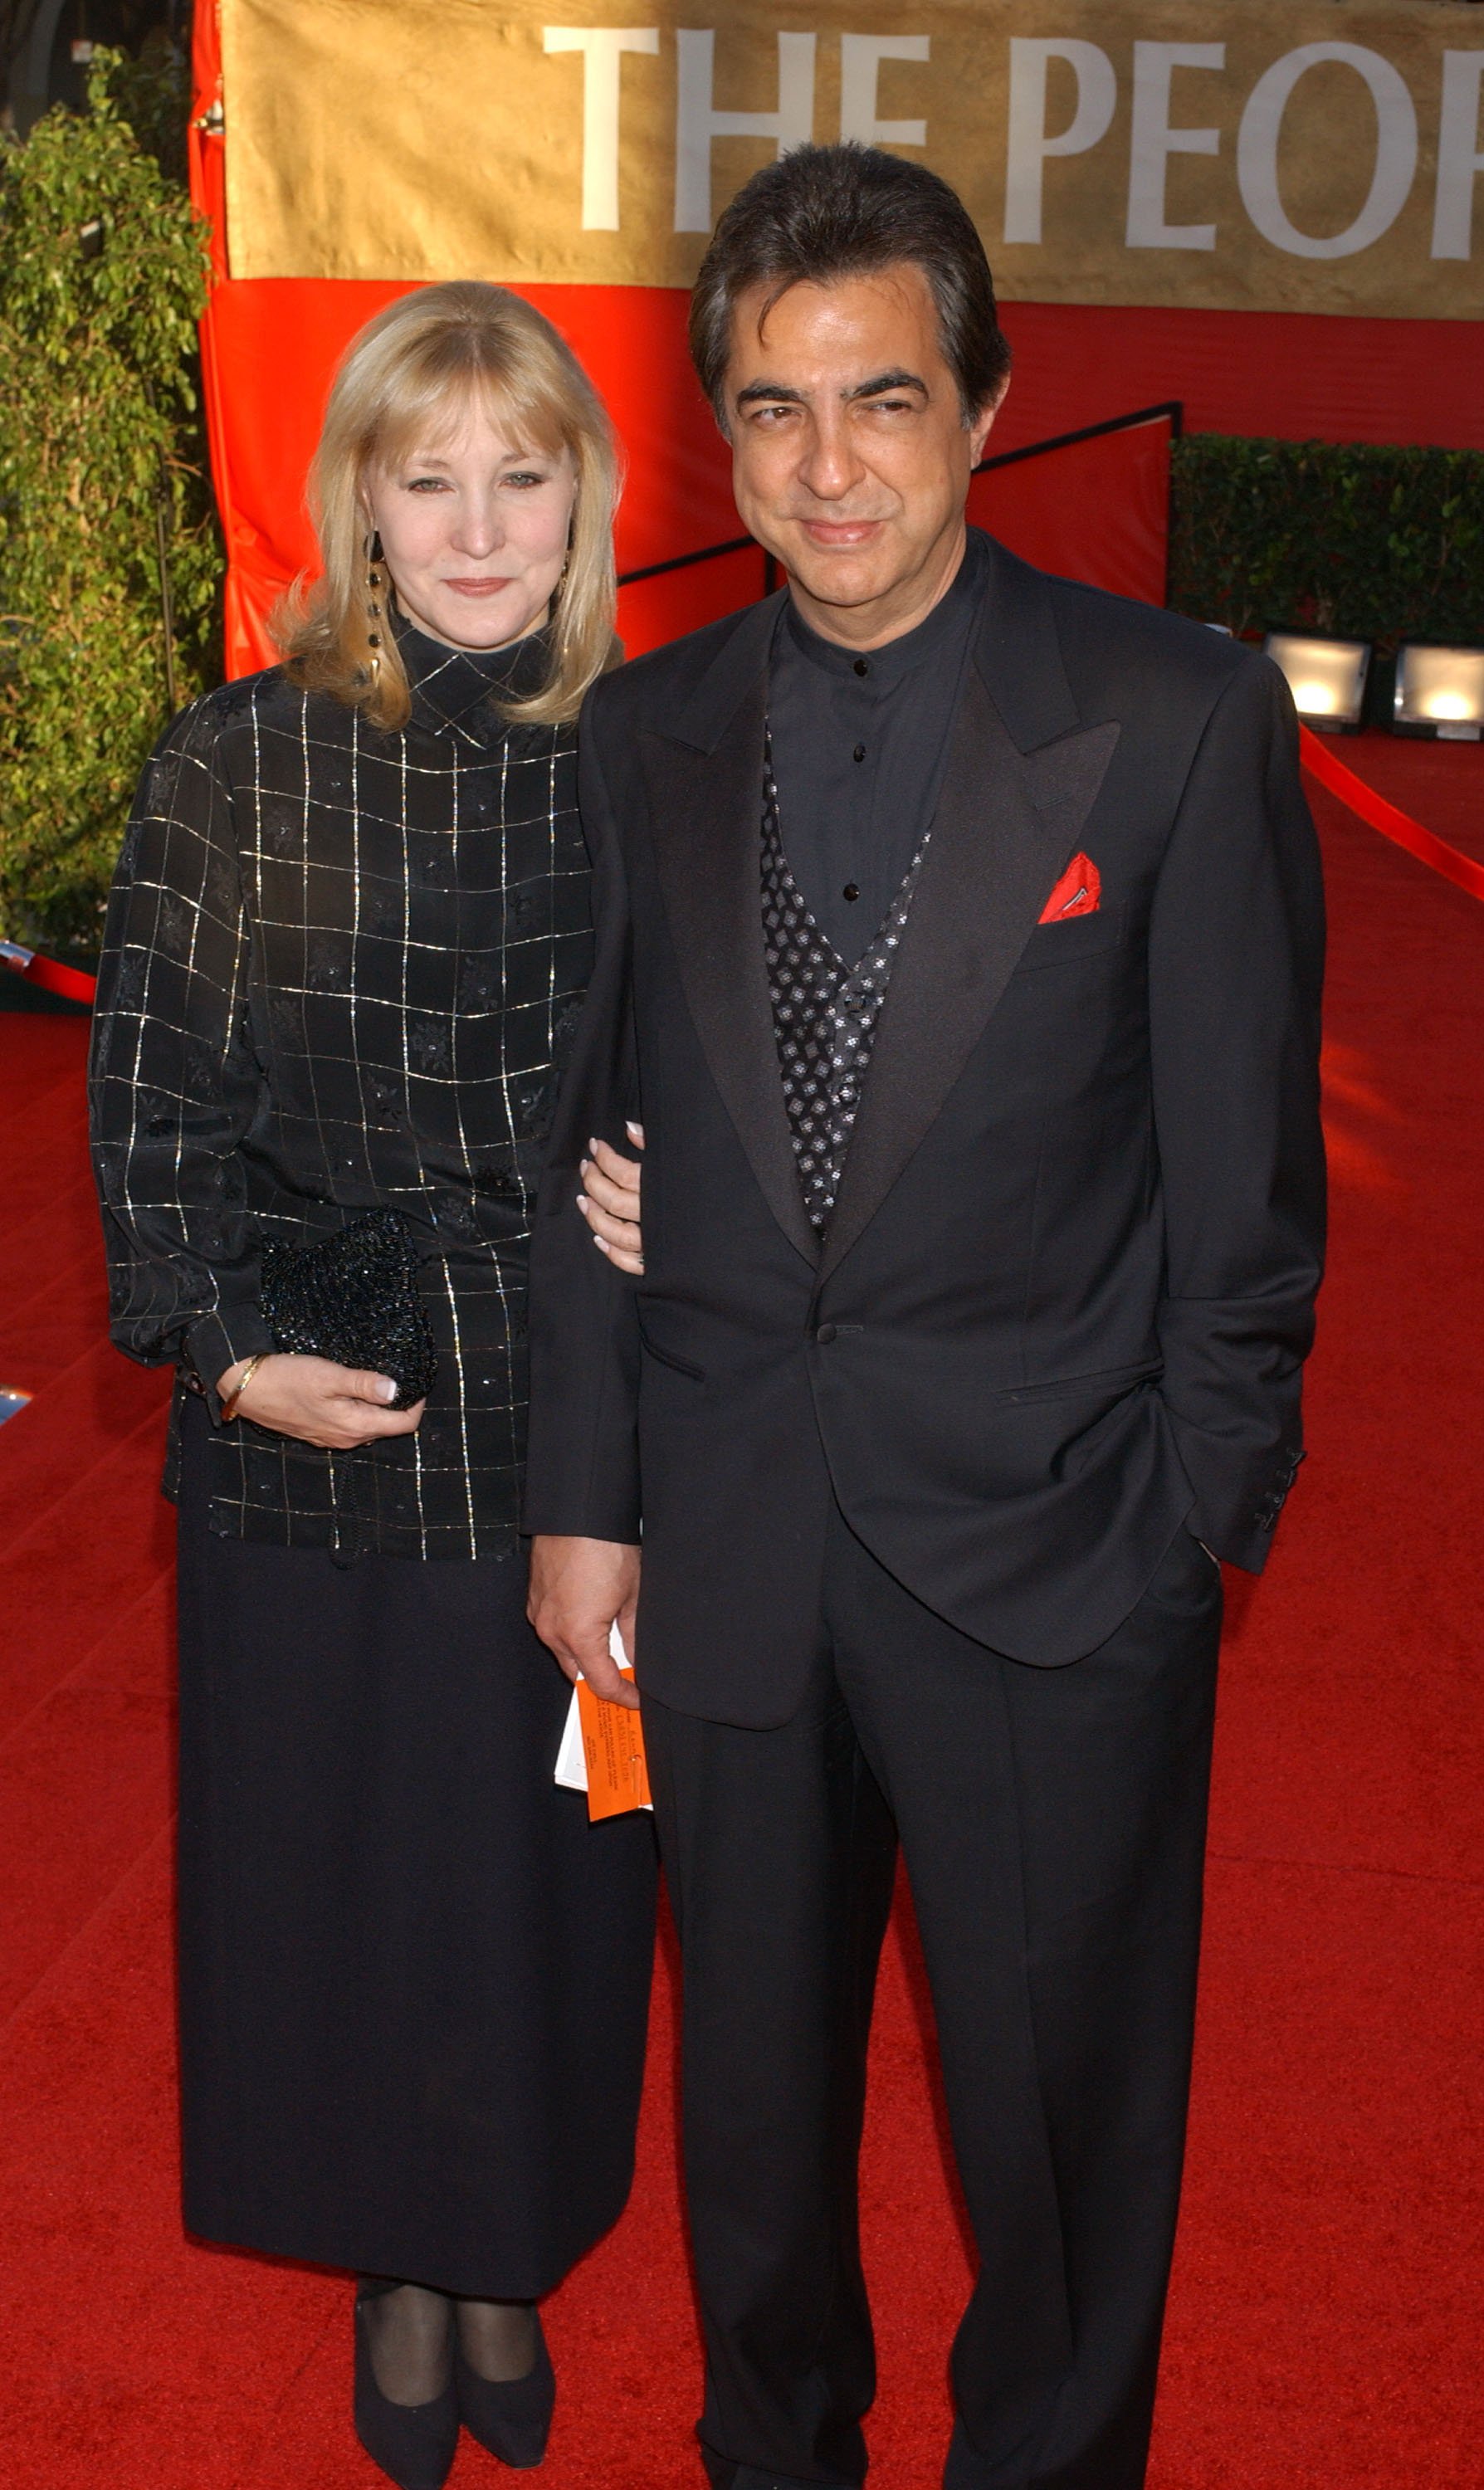 Joe Mantegna and Arlene Vrhel at the 30th Annual People's Choice Awards on January 11, 2004 | Source: Getty Images